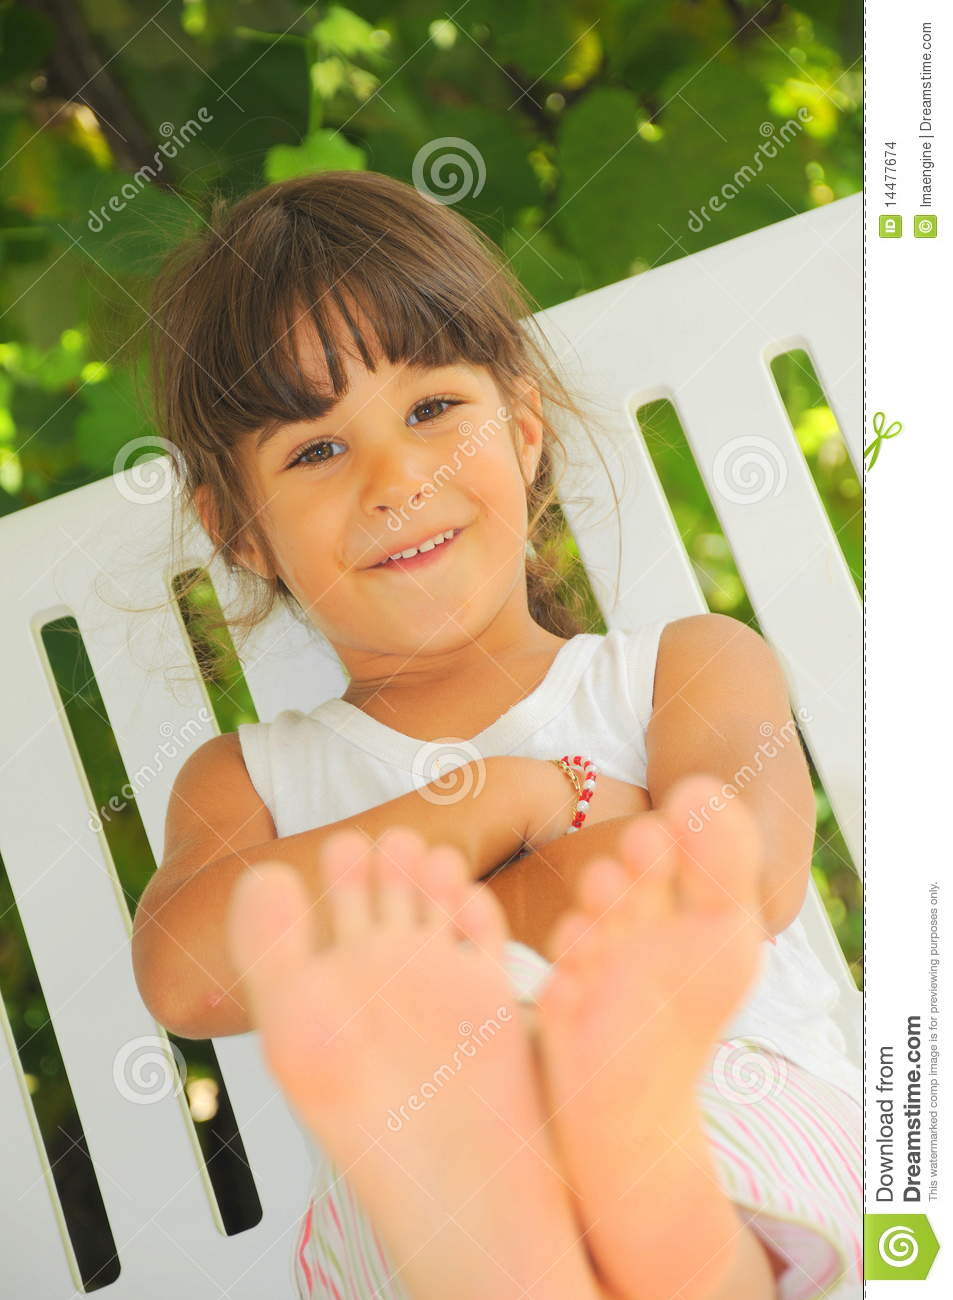 Funnel C. reccomend Young and cute girl feet pics